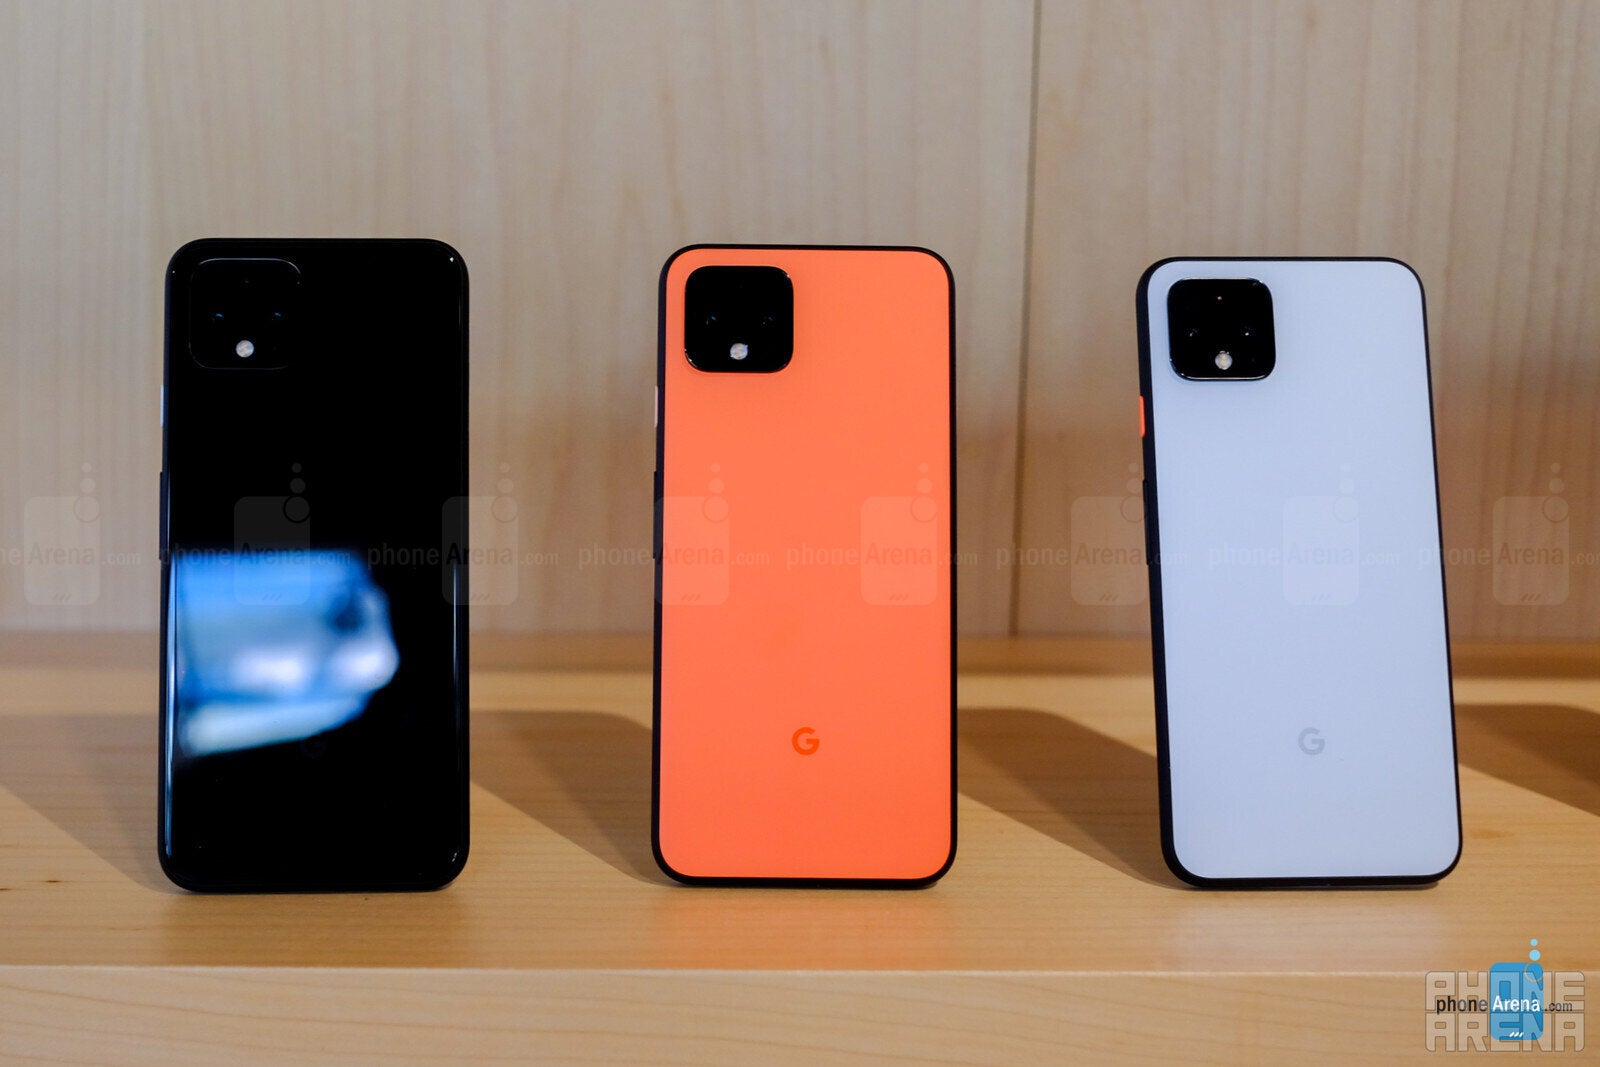 The Google Pixel 4 in&amp;nbsp;Just Black, Clearly White, and limited edition Oh So Orange - Google Pixel 4 &amp; Pixel 4 XL hands-on